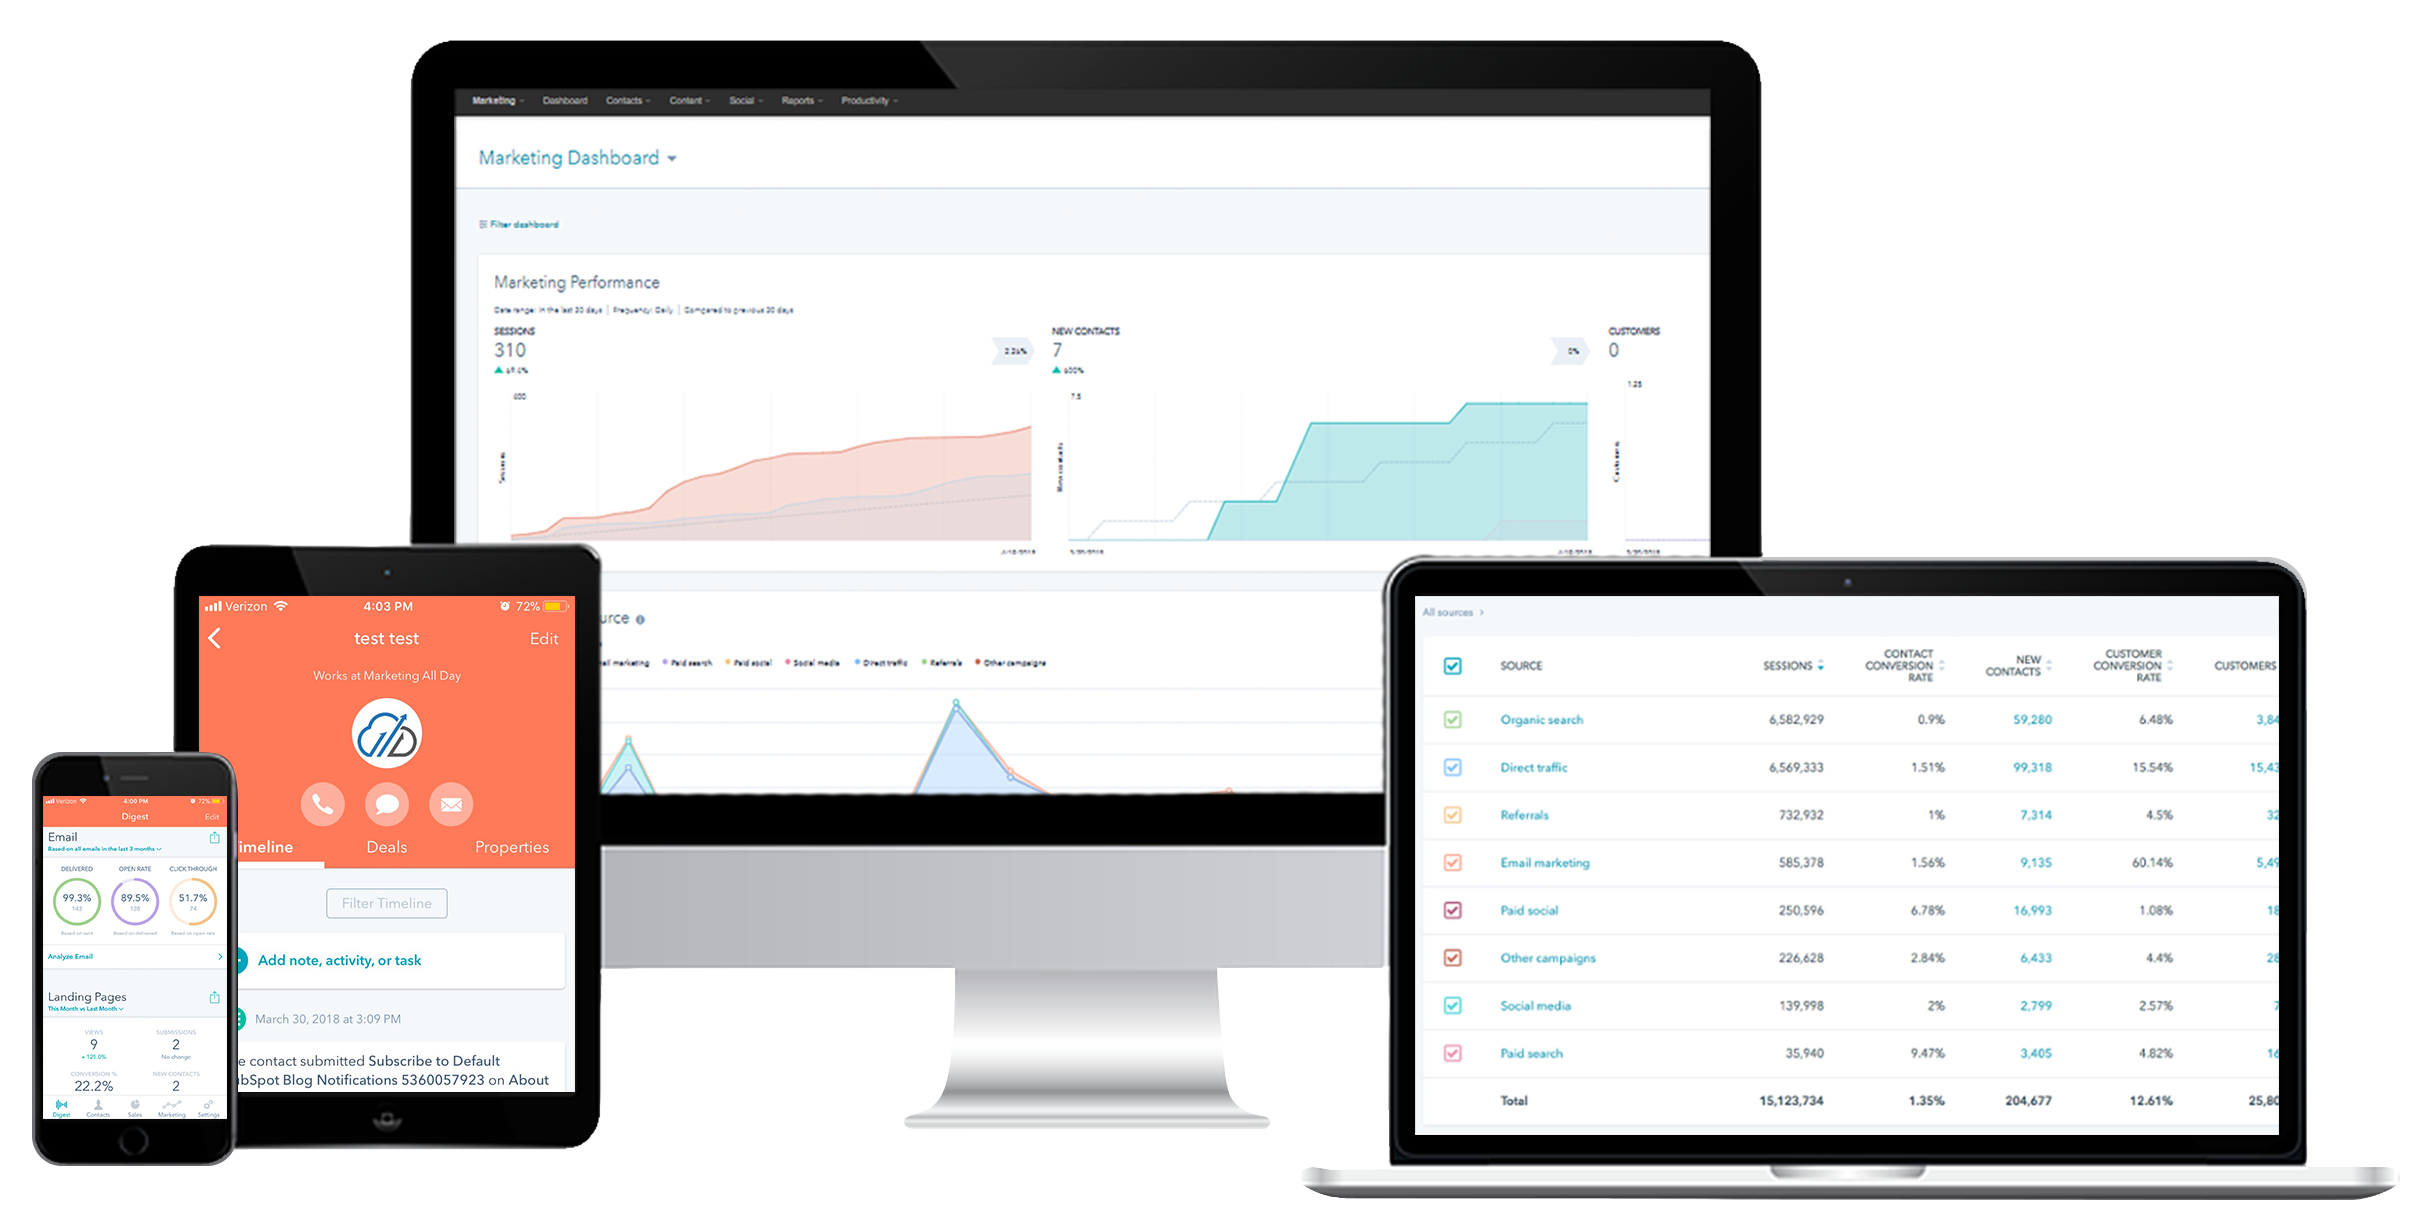 HH and Payroll Marketing Dashboards Across Devices